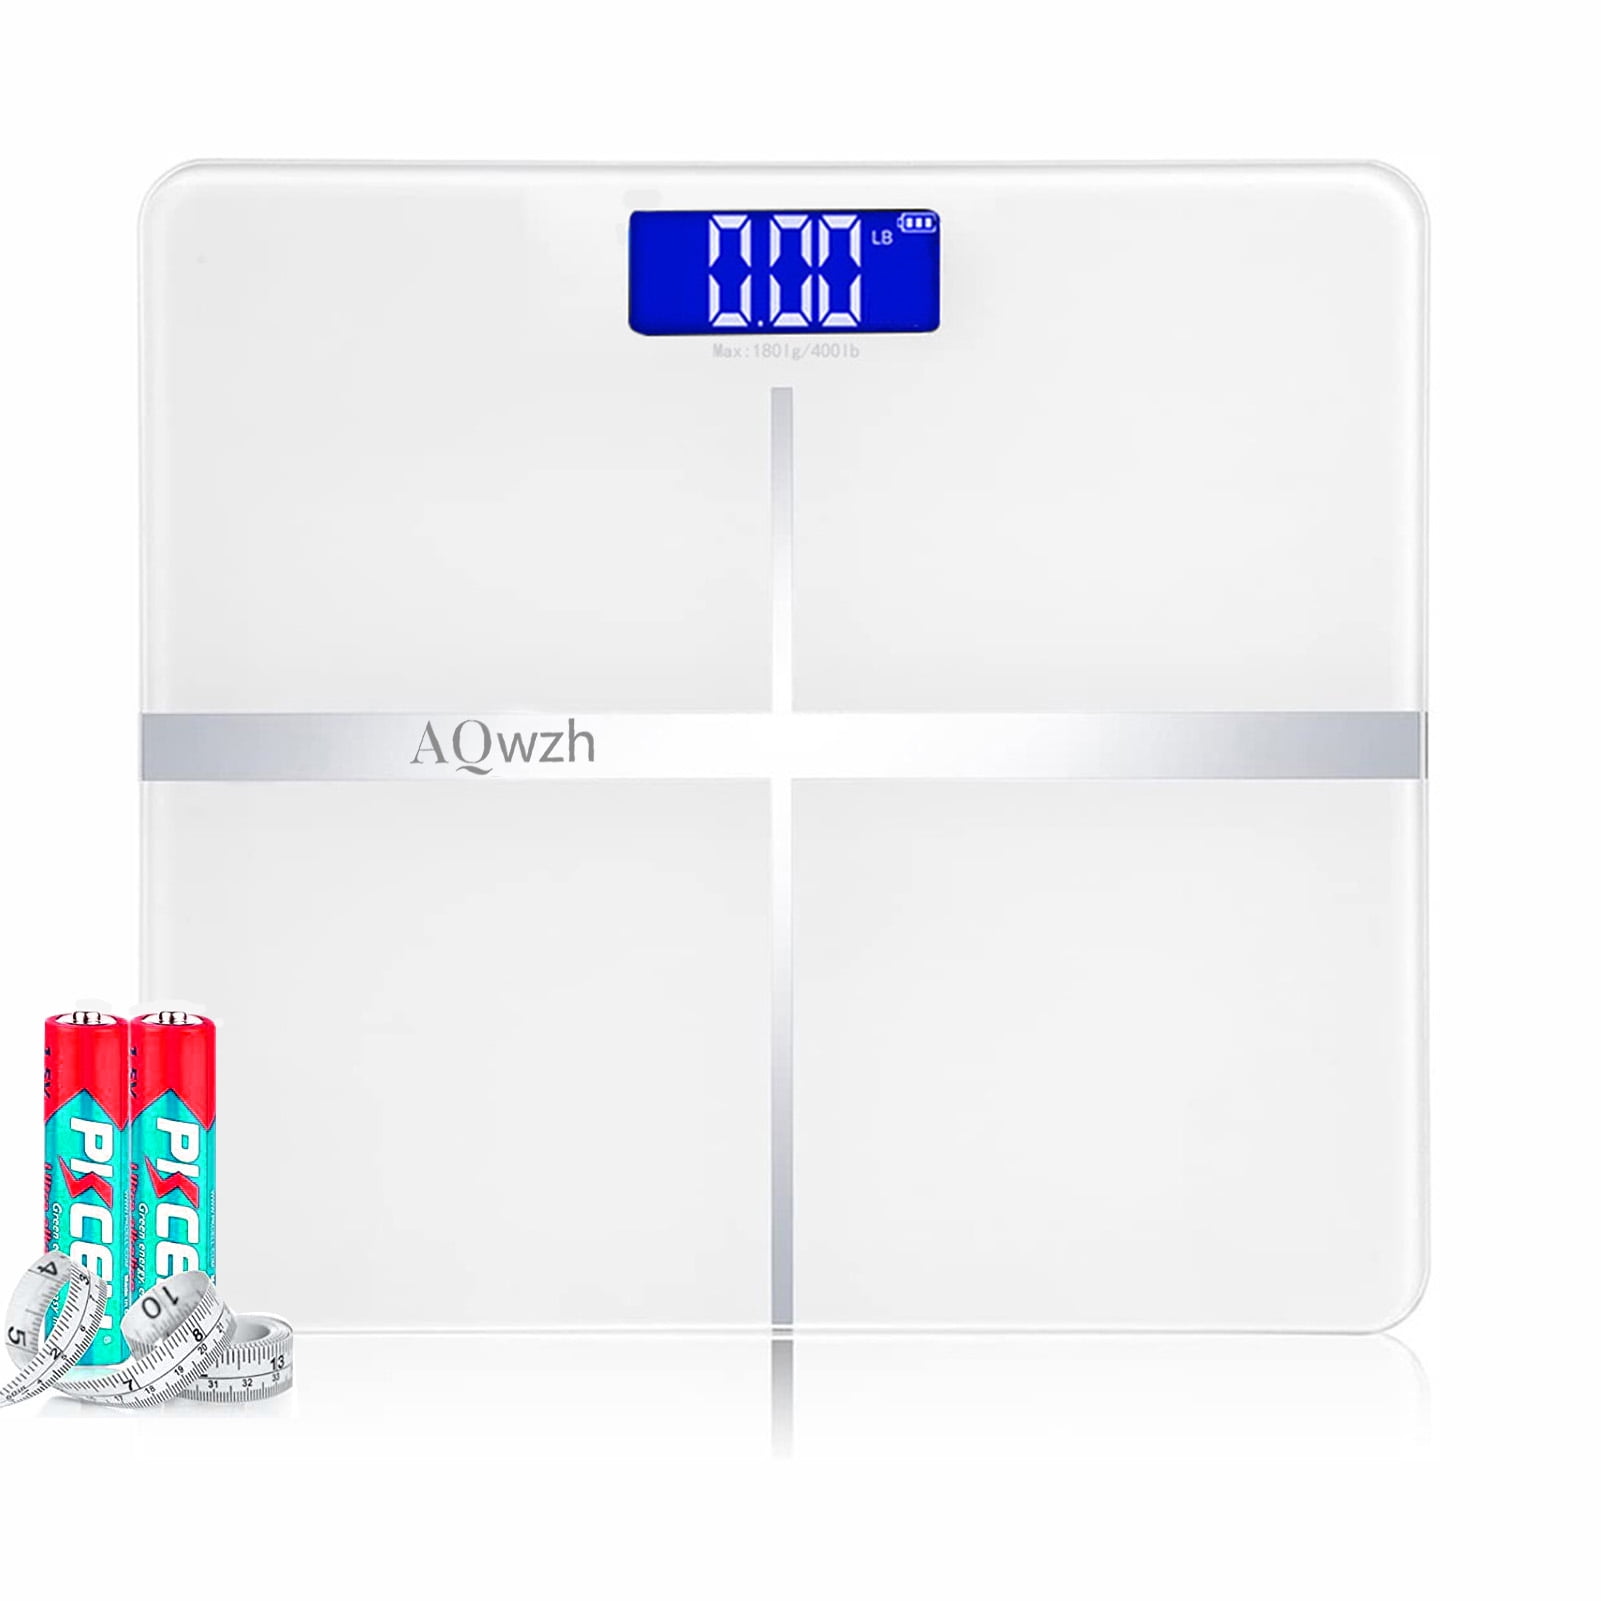 180kg Digital Body Weight Bathroom Scale with Step-On  Assorted Colors 400lb 